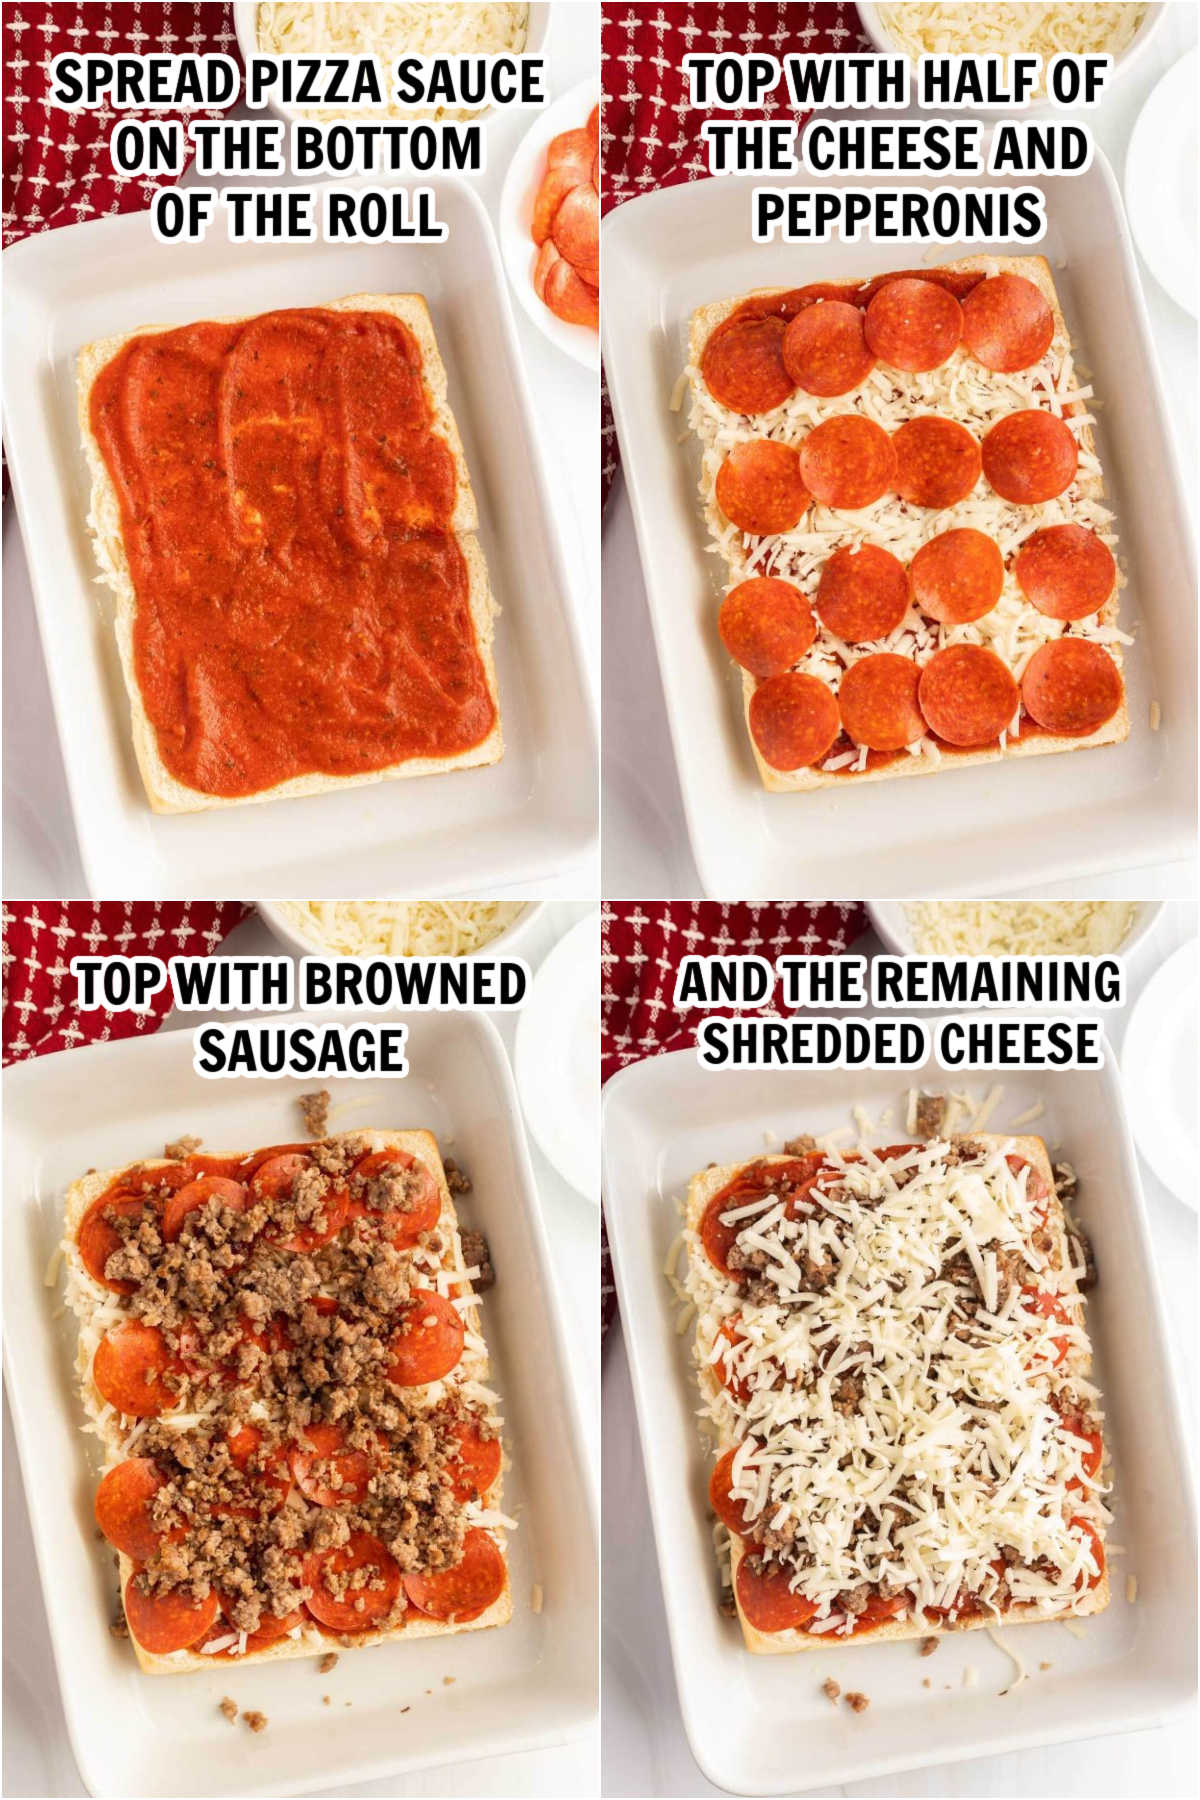 The process of making the pizza sliders